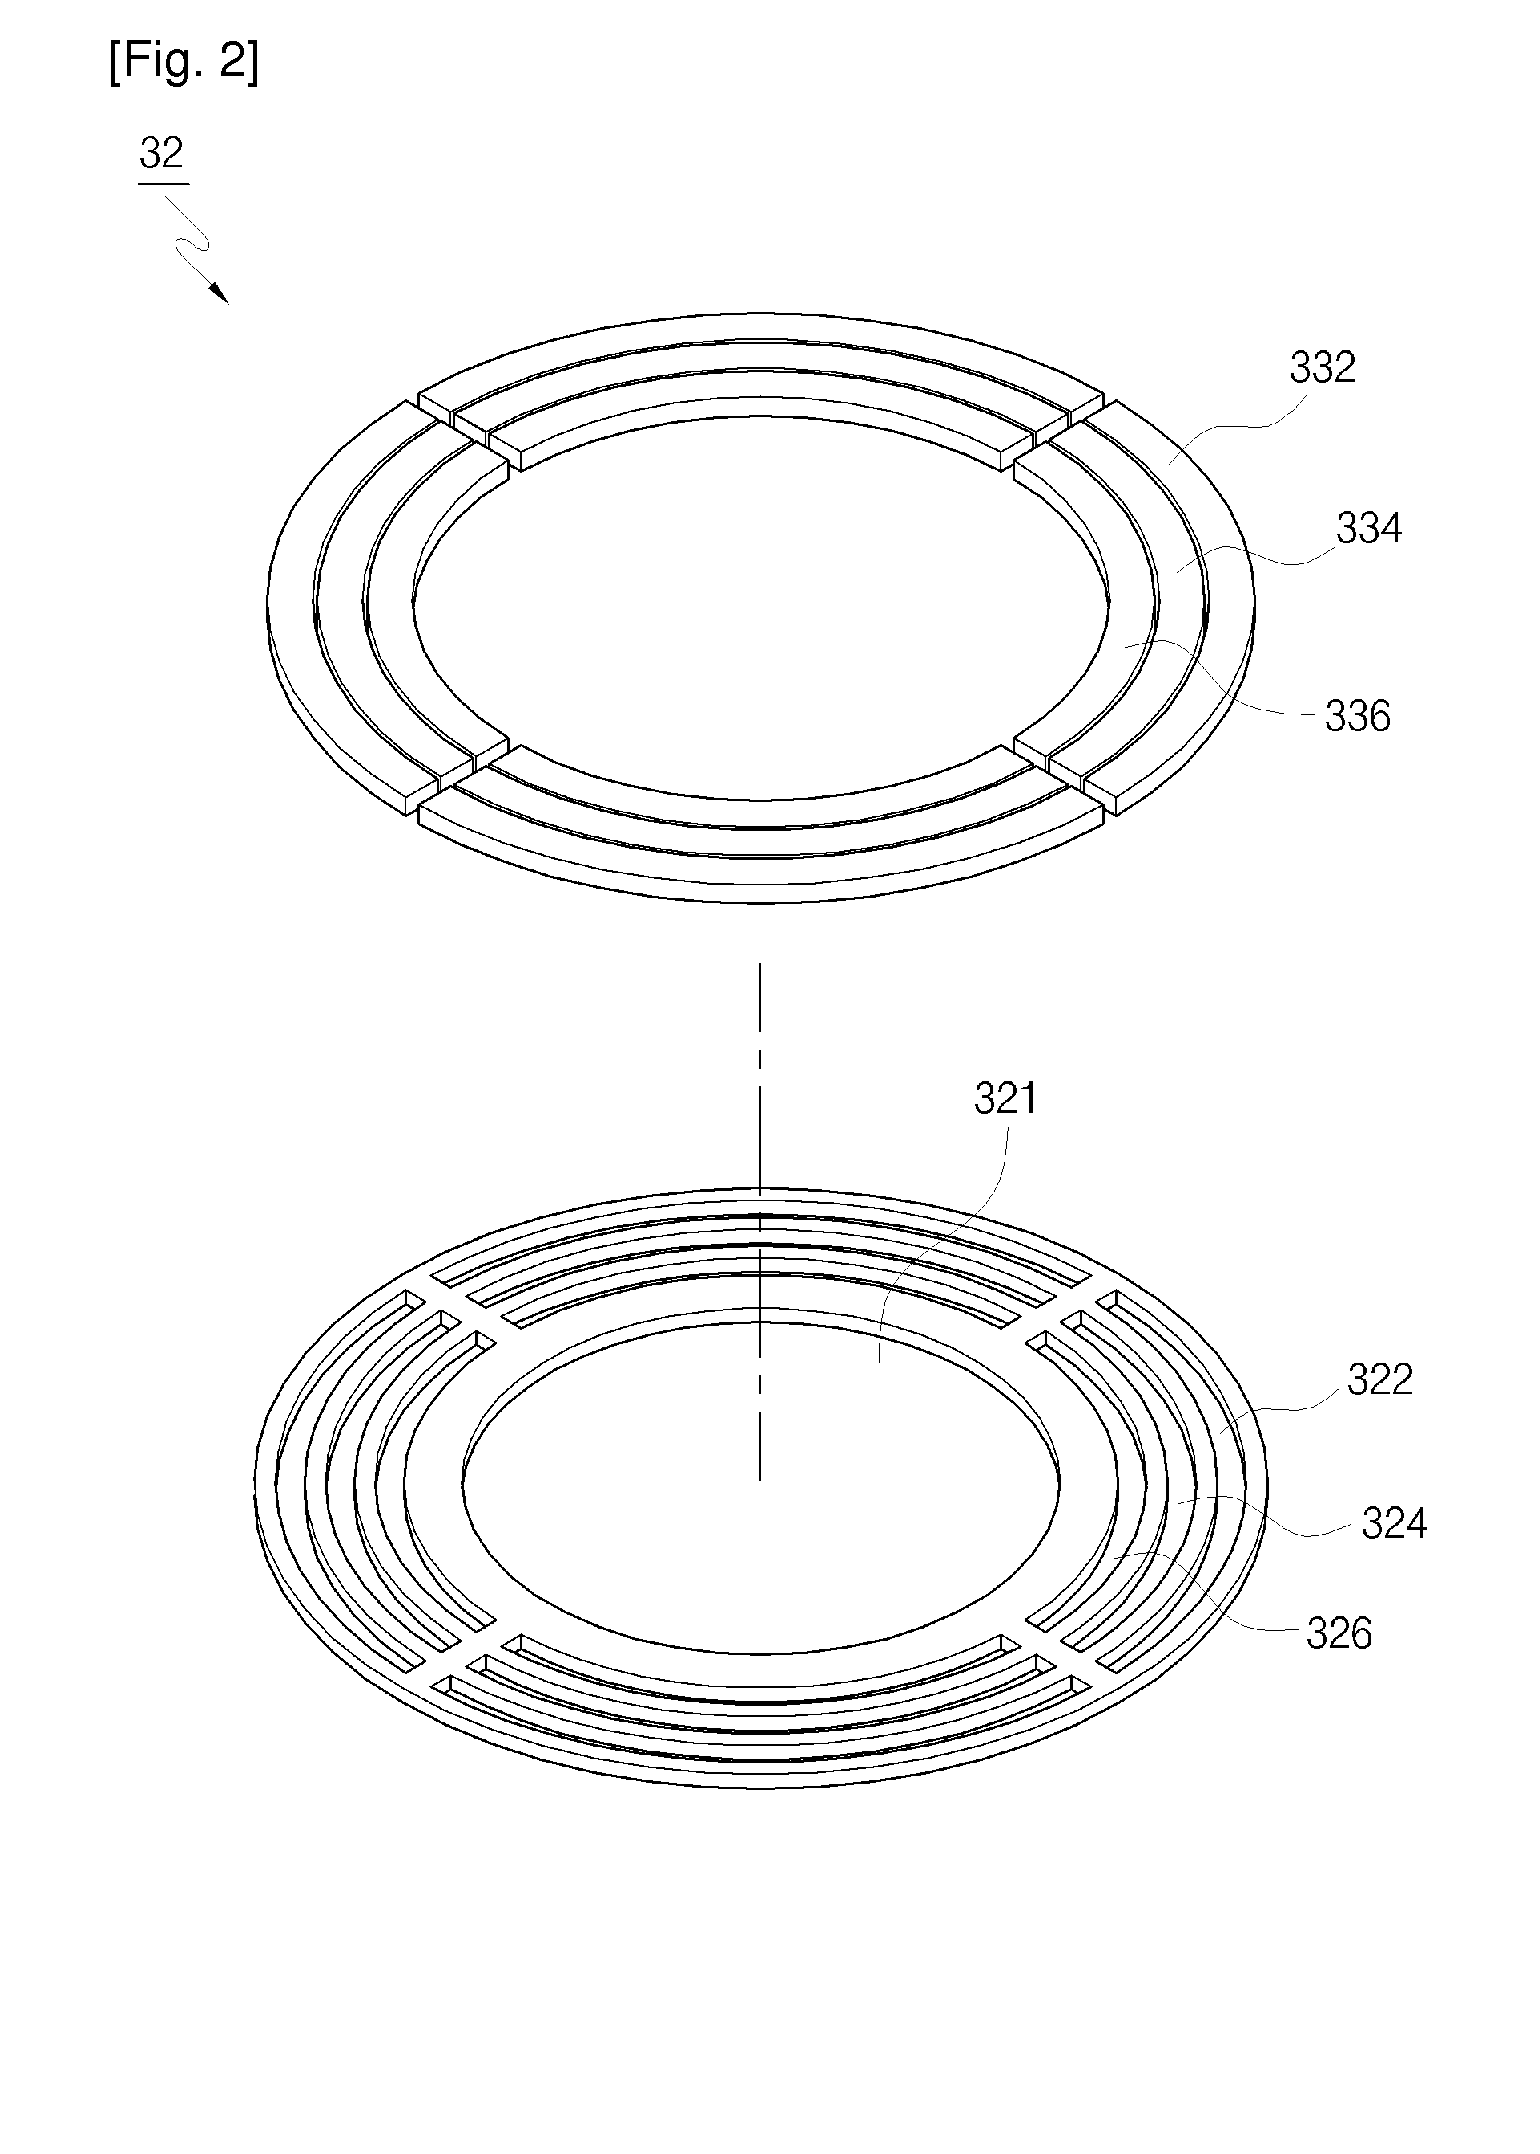 Showerhead, substrate processing apparatus including the showerhead, and plasma supplying method using the showerhead